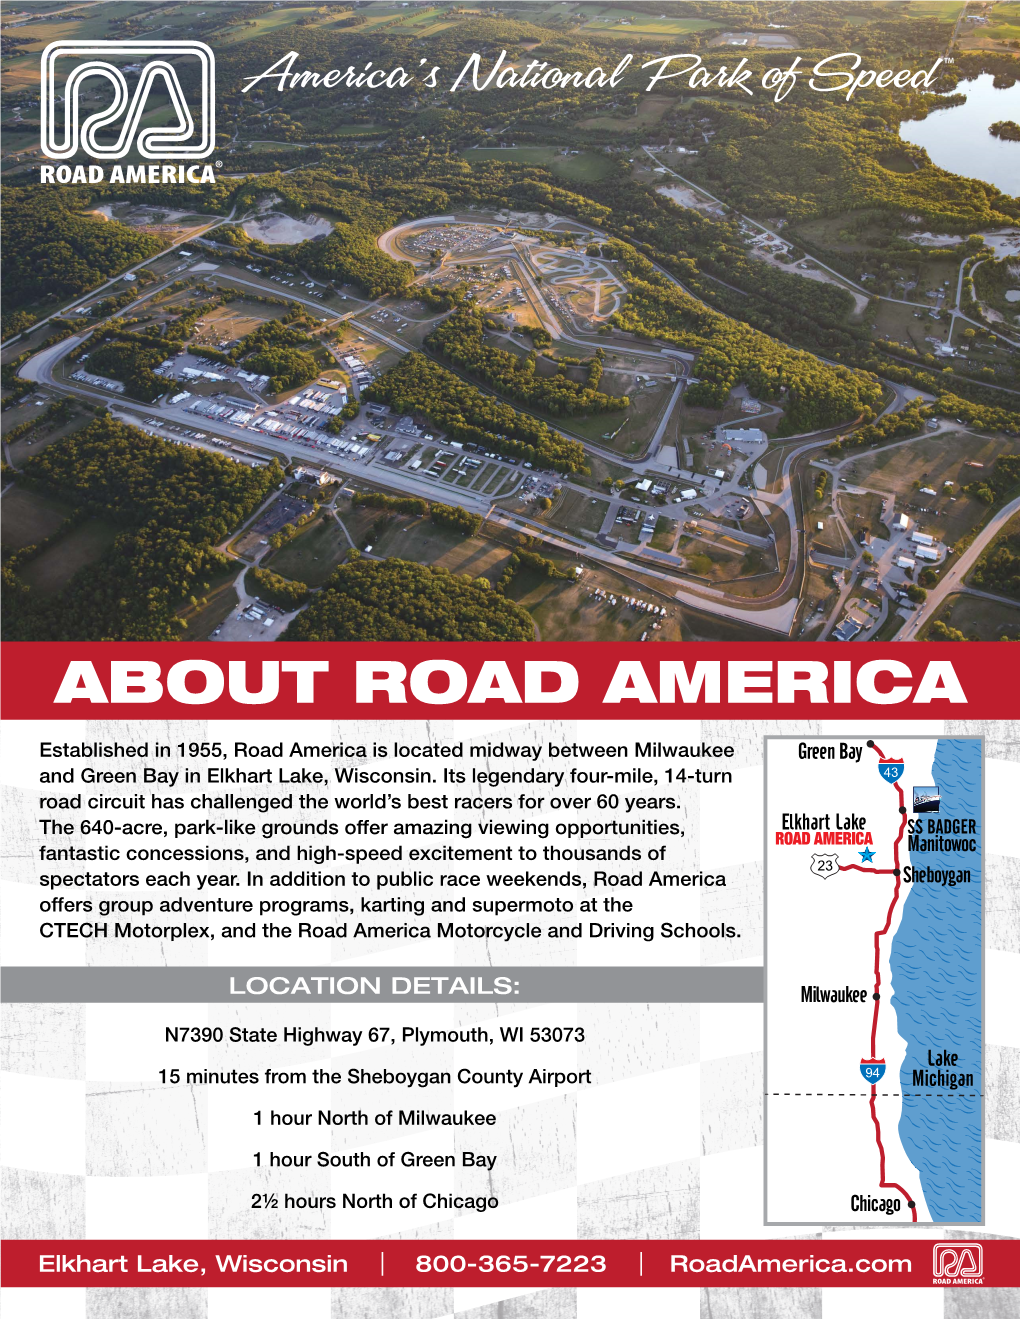 About Road America